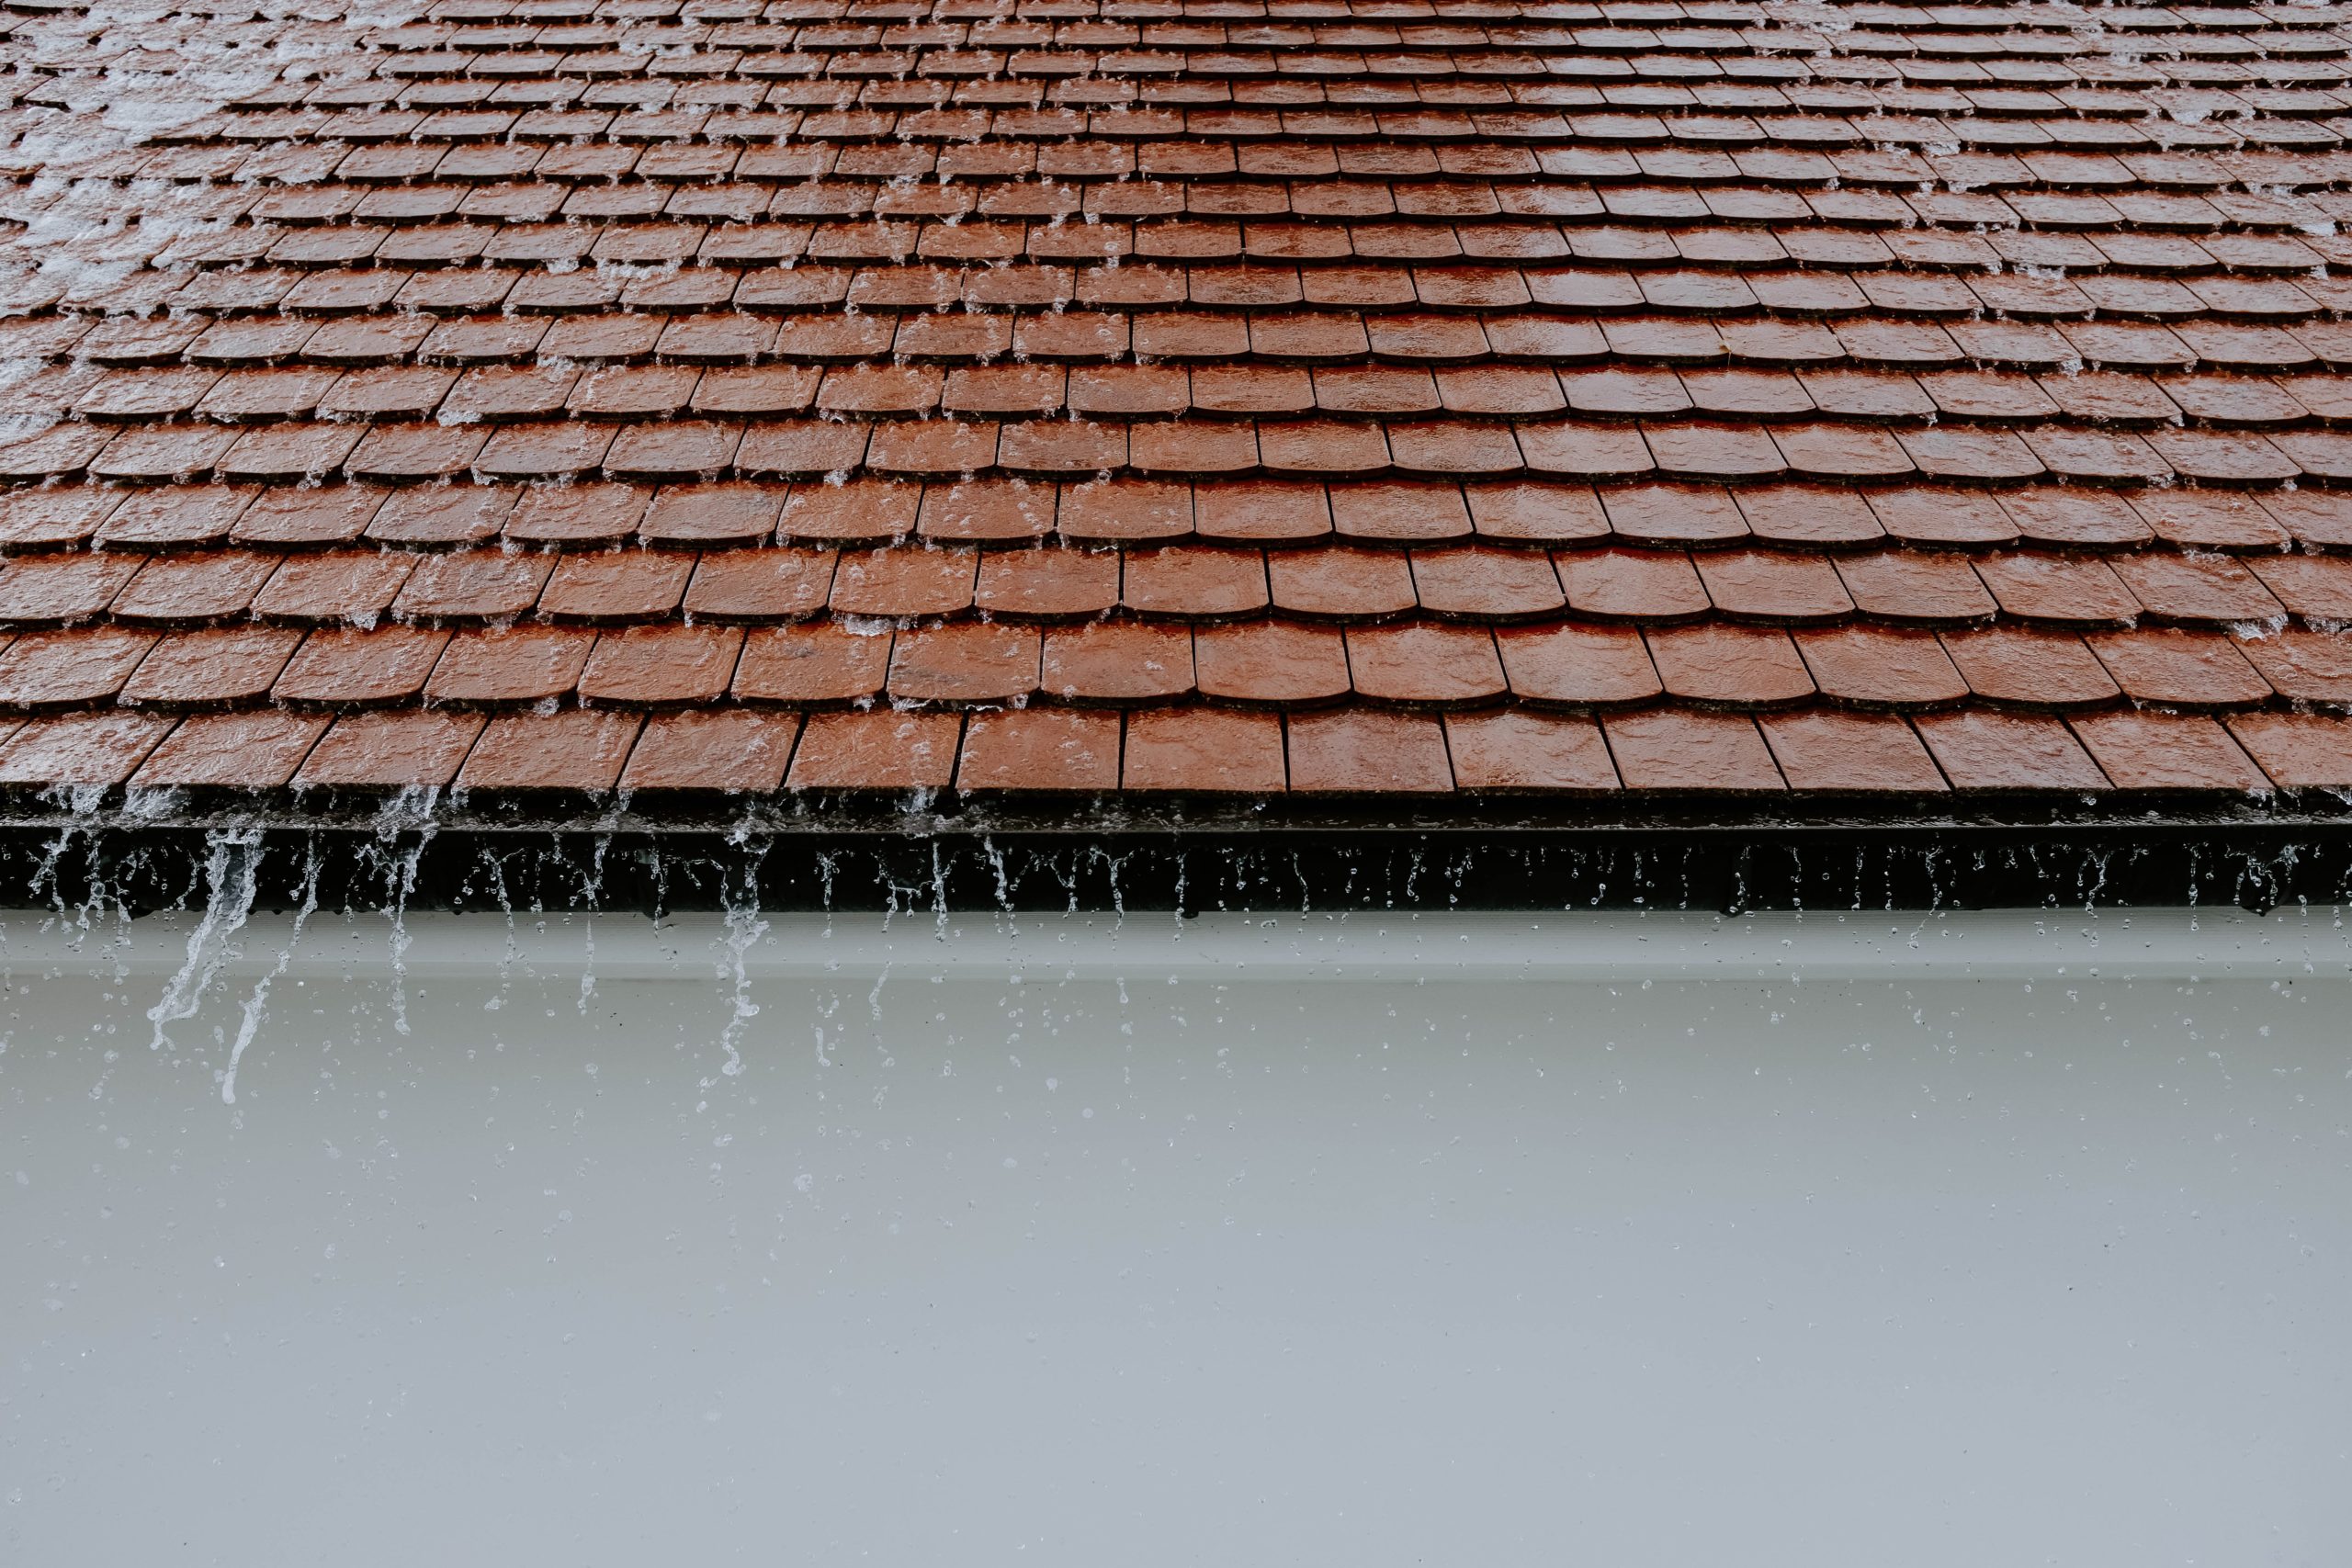 rain pouring down roof into gutters